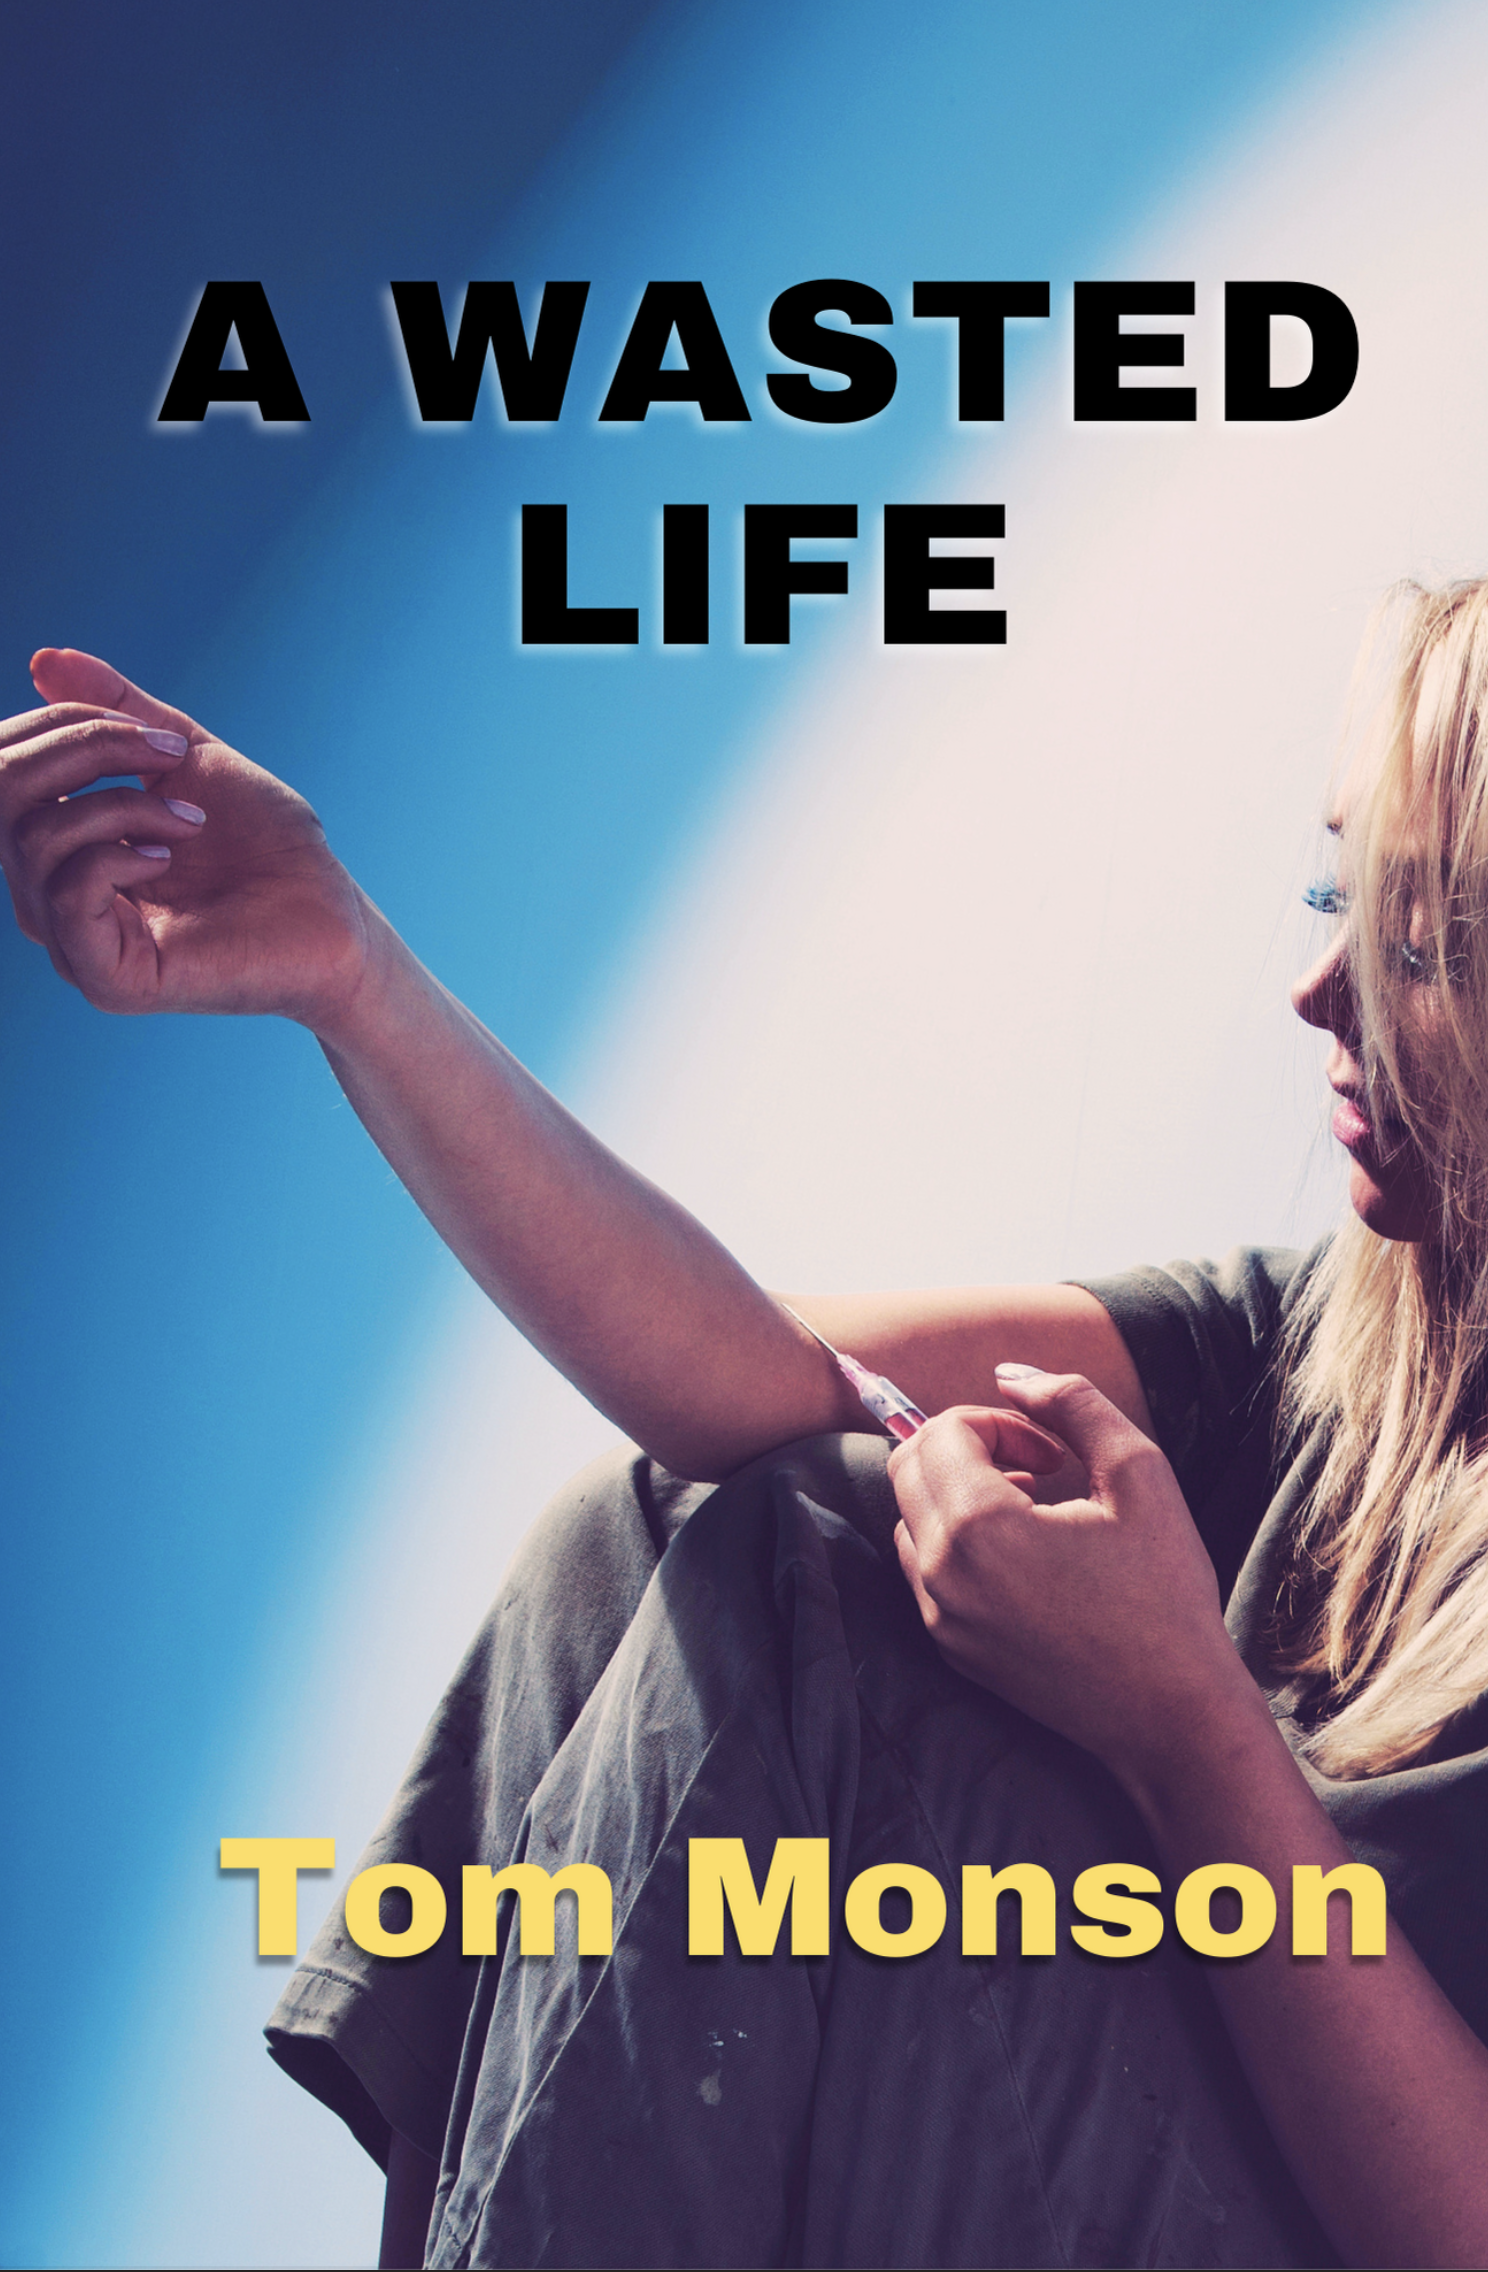 A Wasted Life: The Devastating Effects of Drugs and Substance Abuse on People and Society